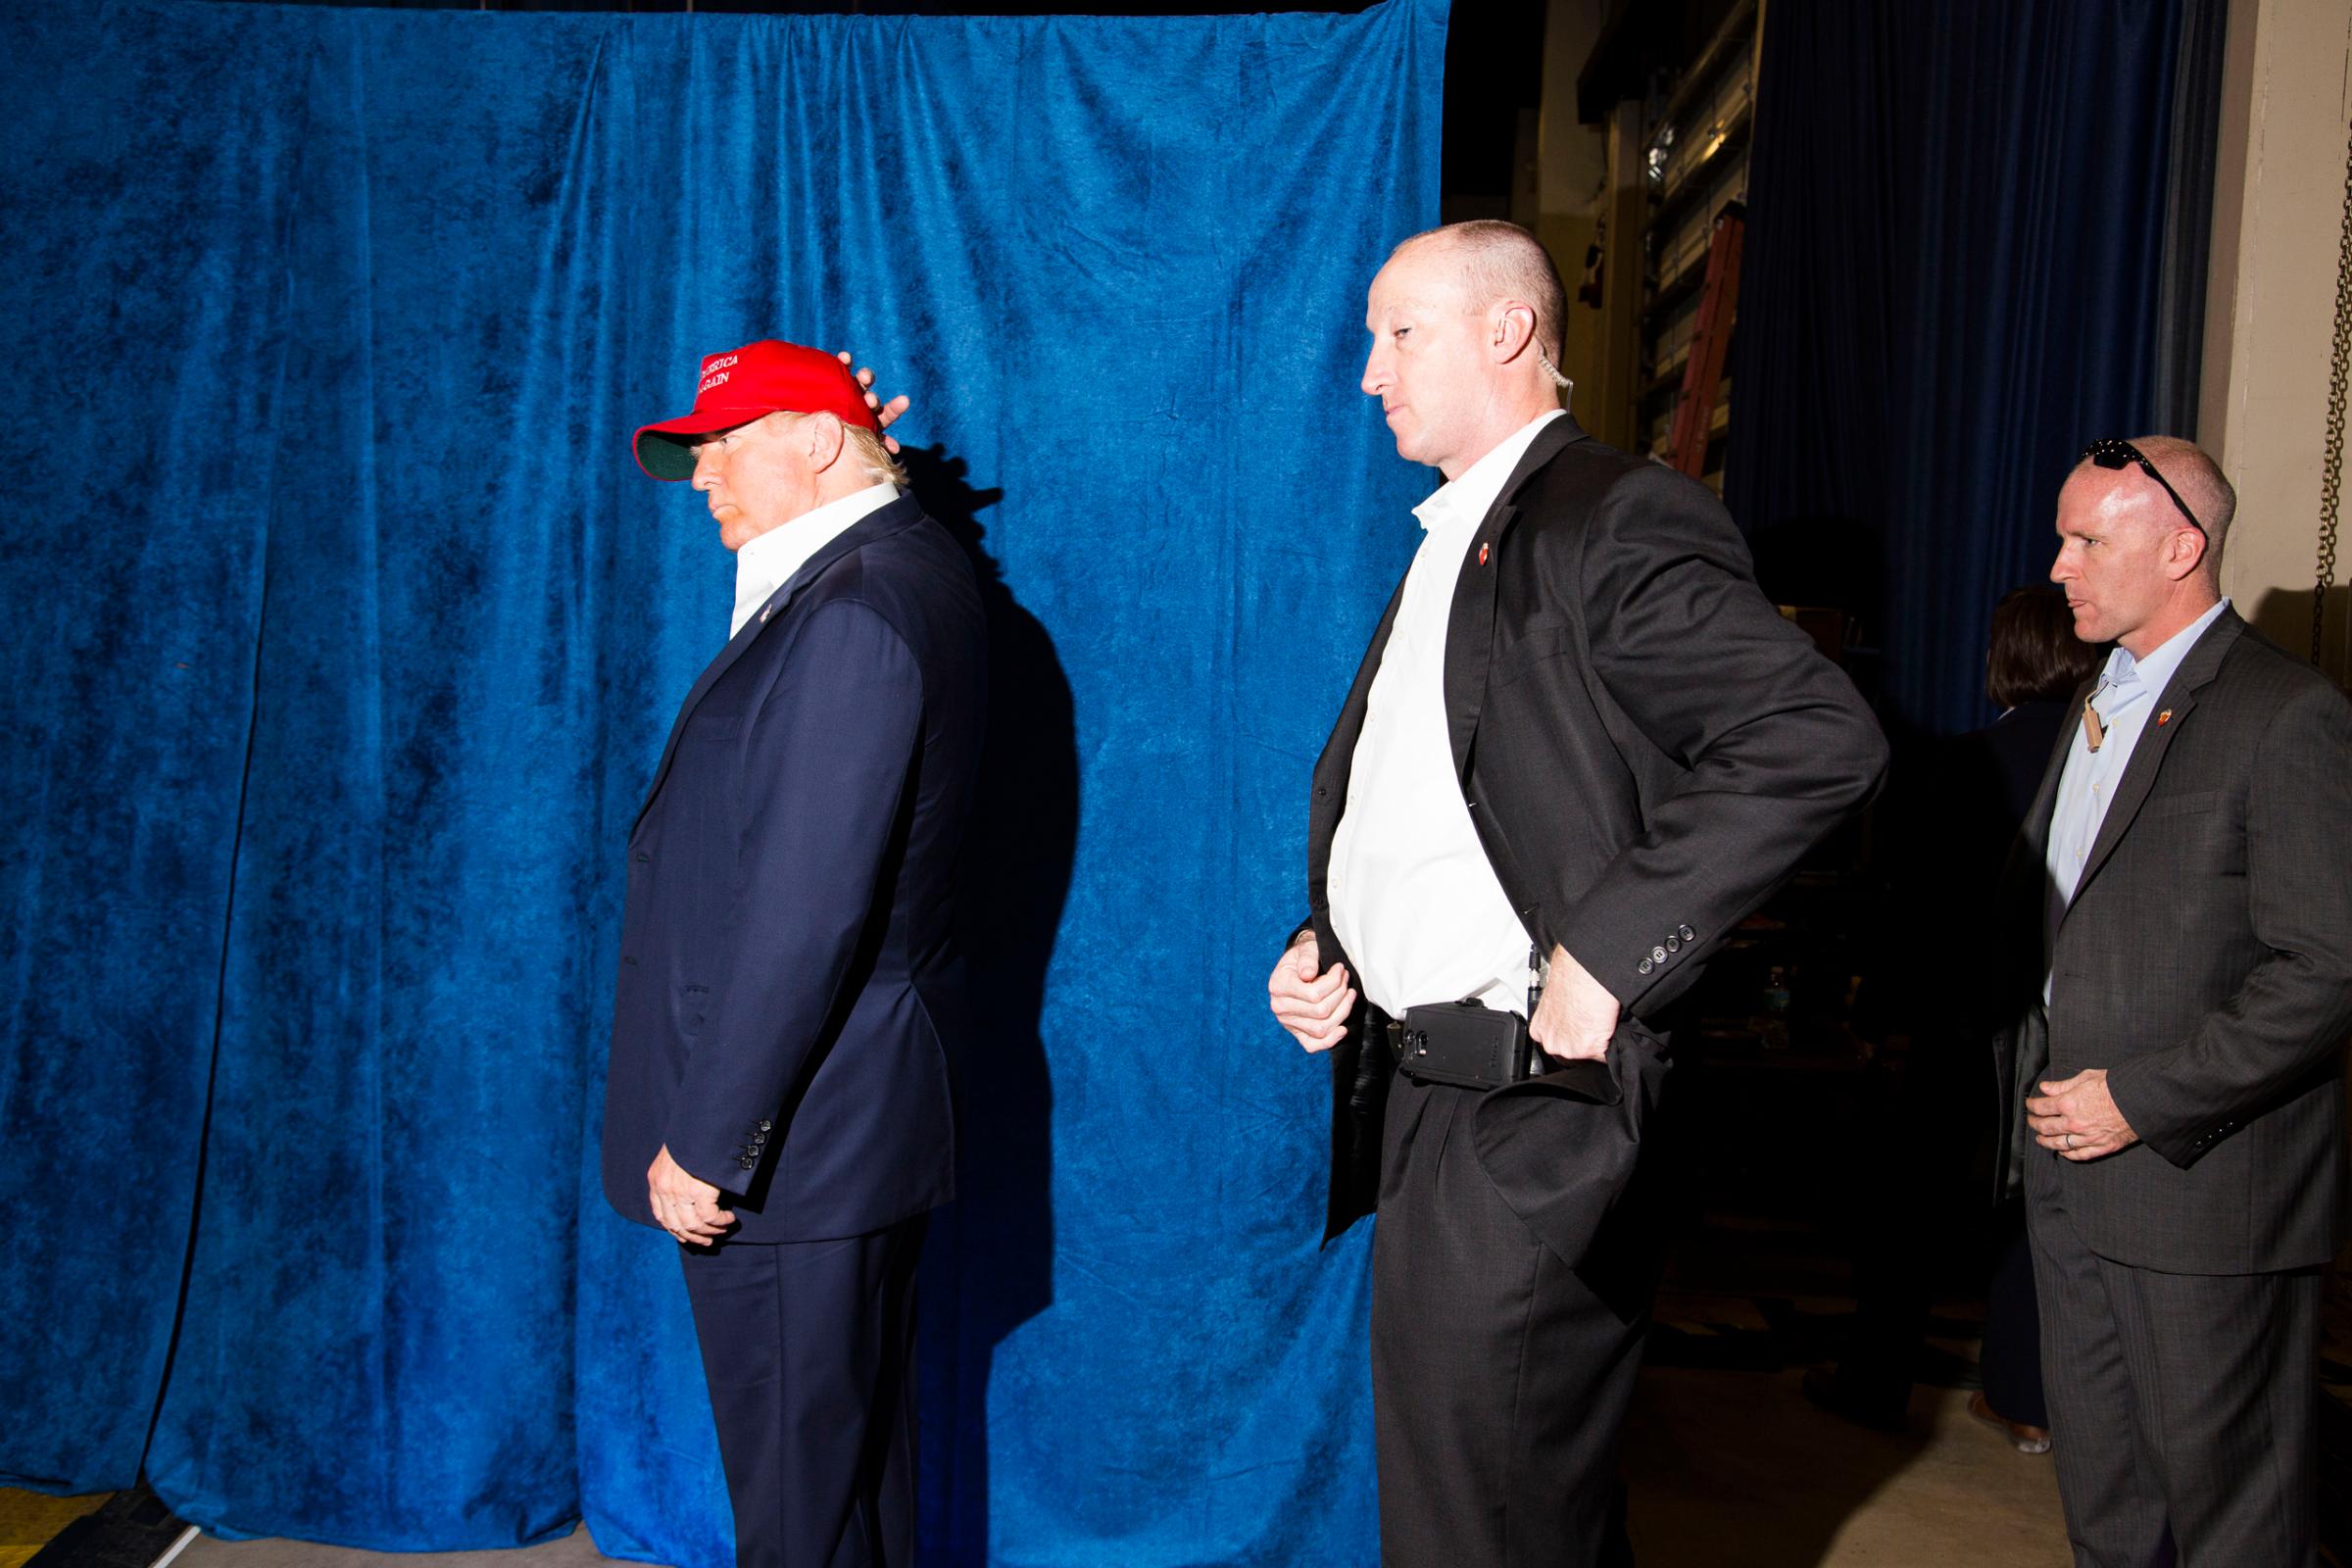 Republican presidential candidate Donald Trump backstage at a campaign rally in Sarasota, Fla. Nov. 28, 2015.